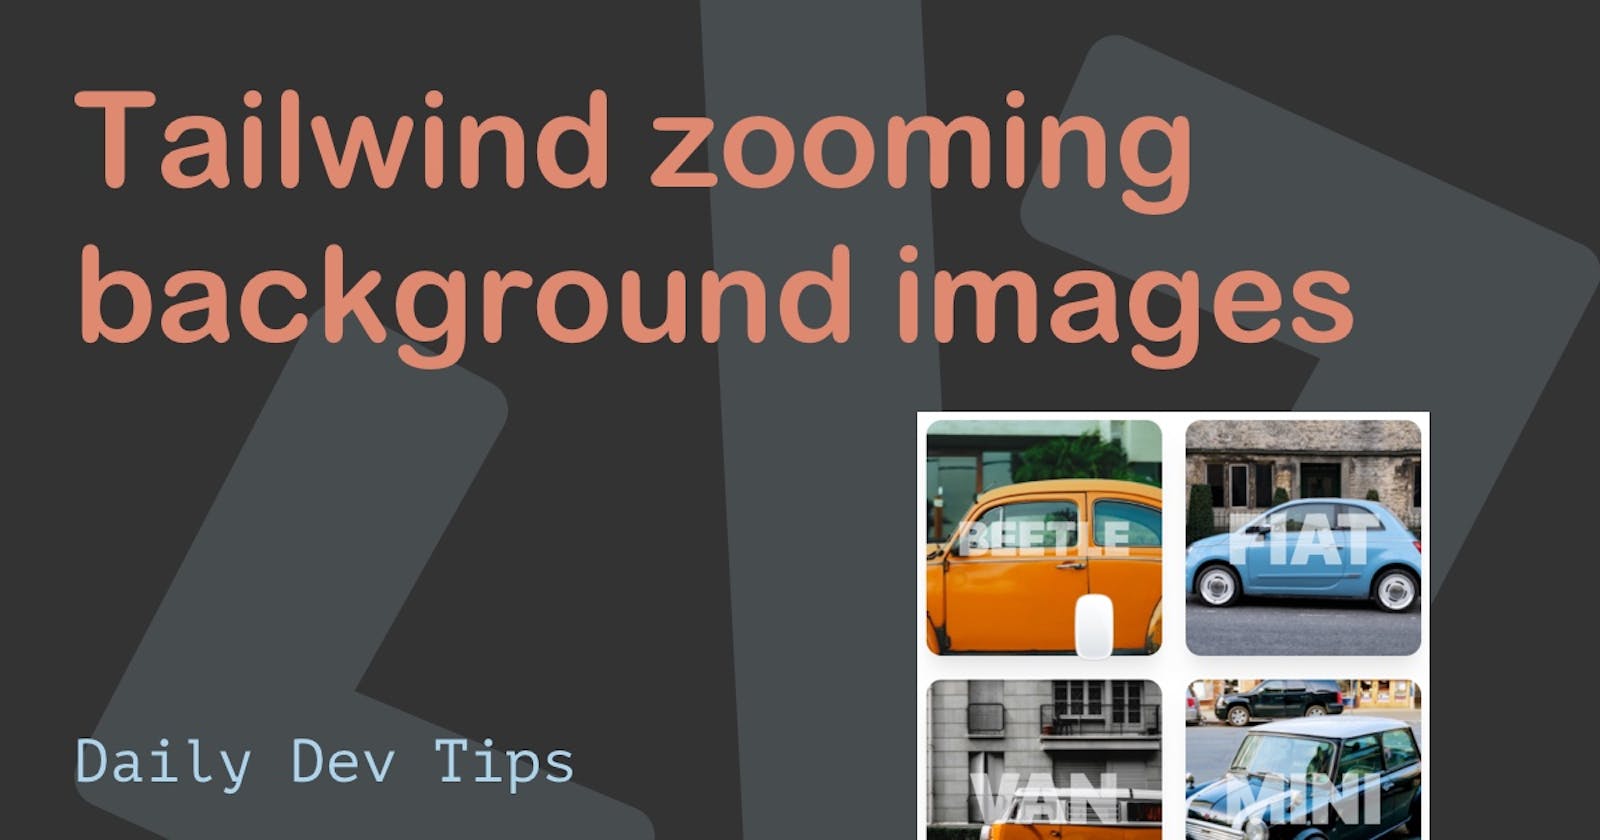 Tailwind zooming background images